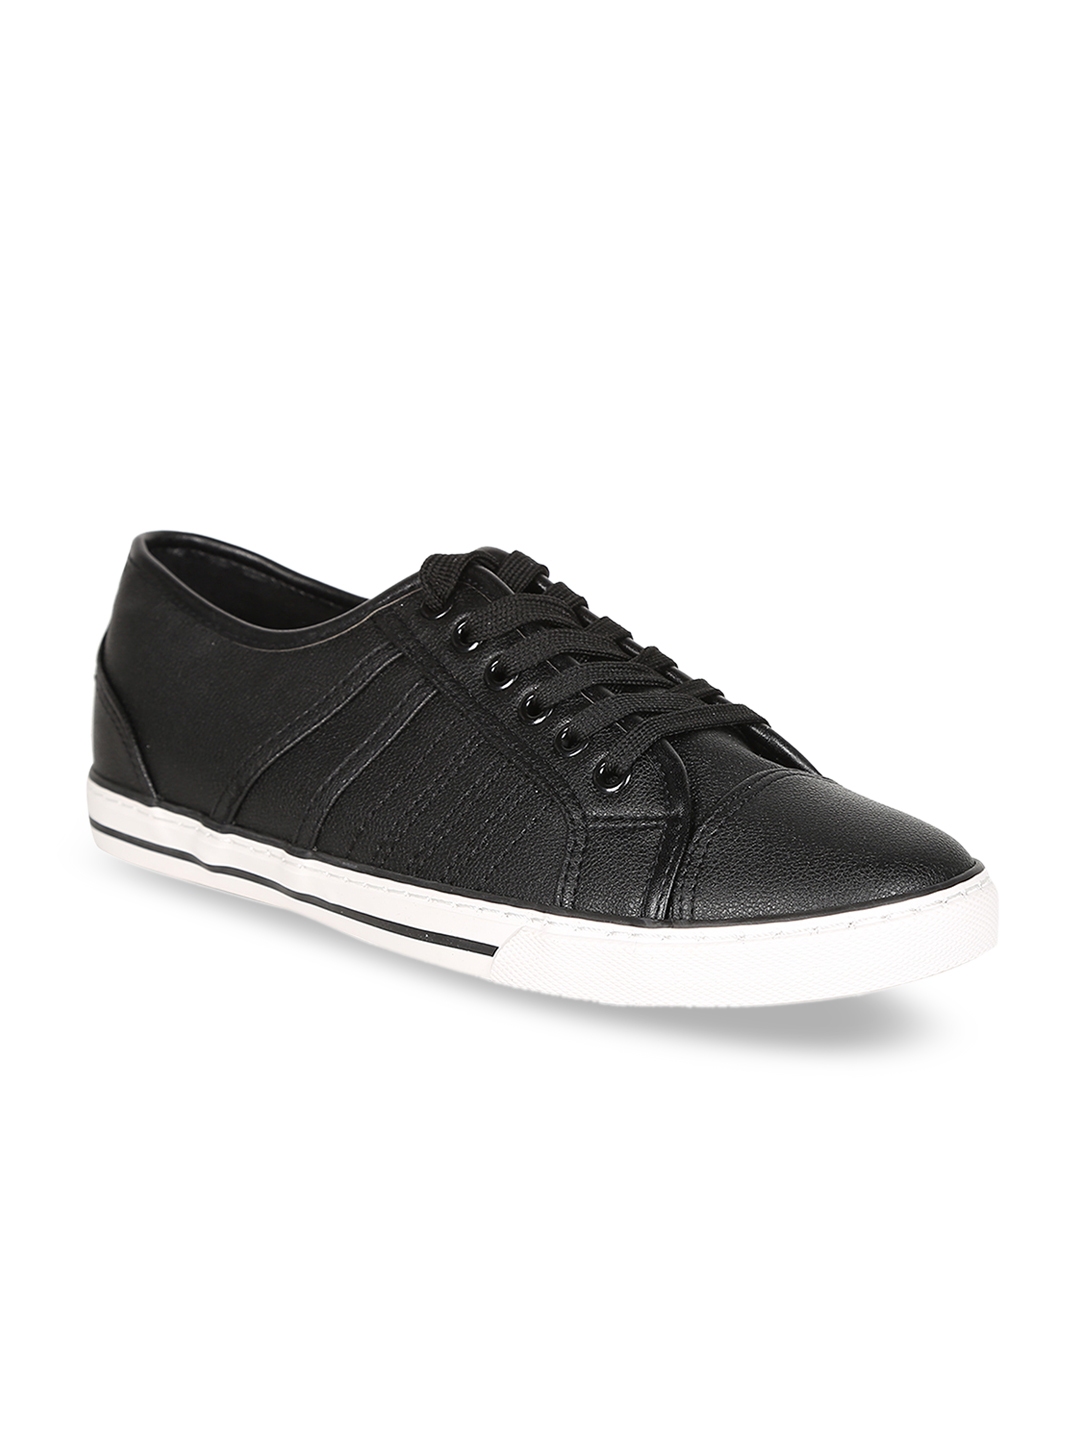 Buy Peter England Men Black Solid Sneakers - Casual Shoes for Men ...